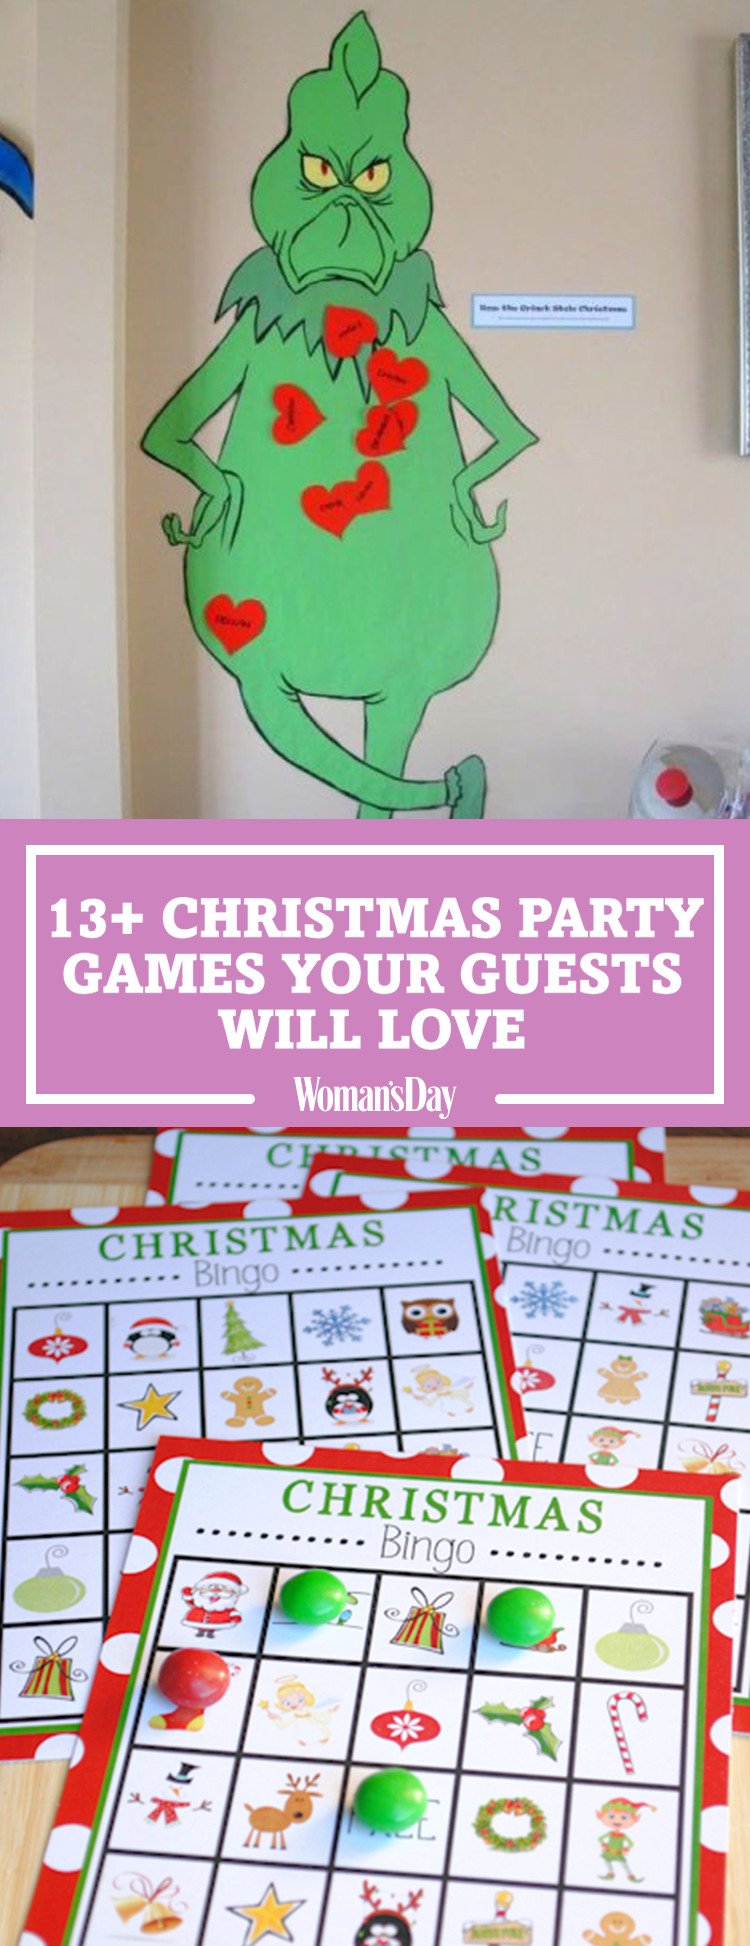 DIY Christmas Activities
 17 Fun Christmas Party Games for Kids DIY Holiday Party